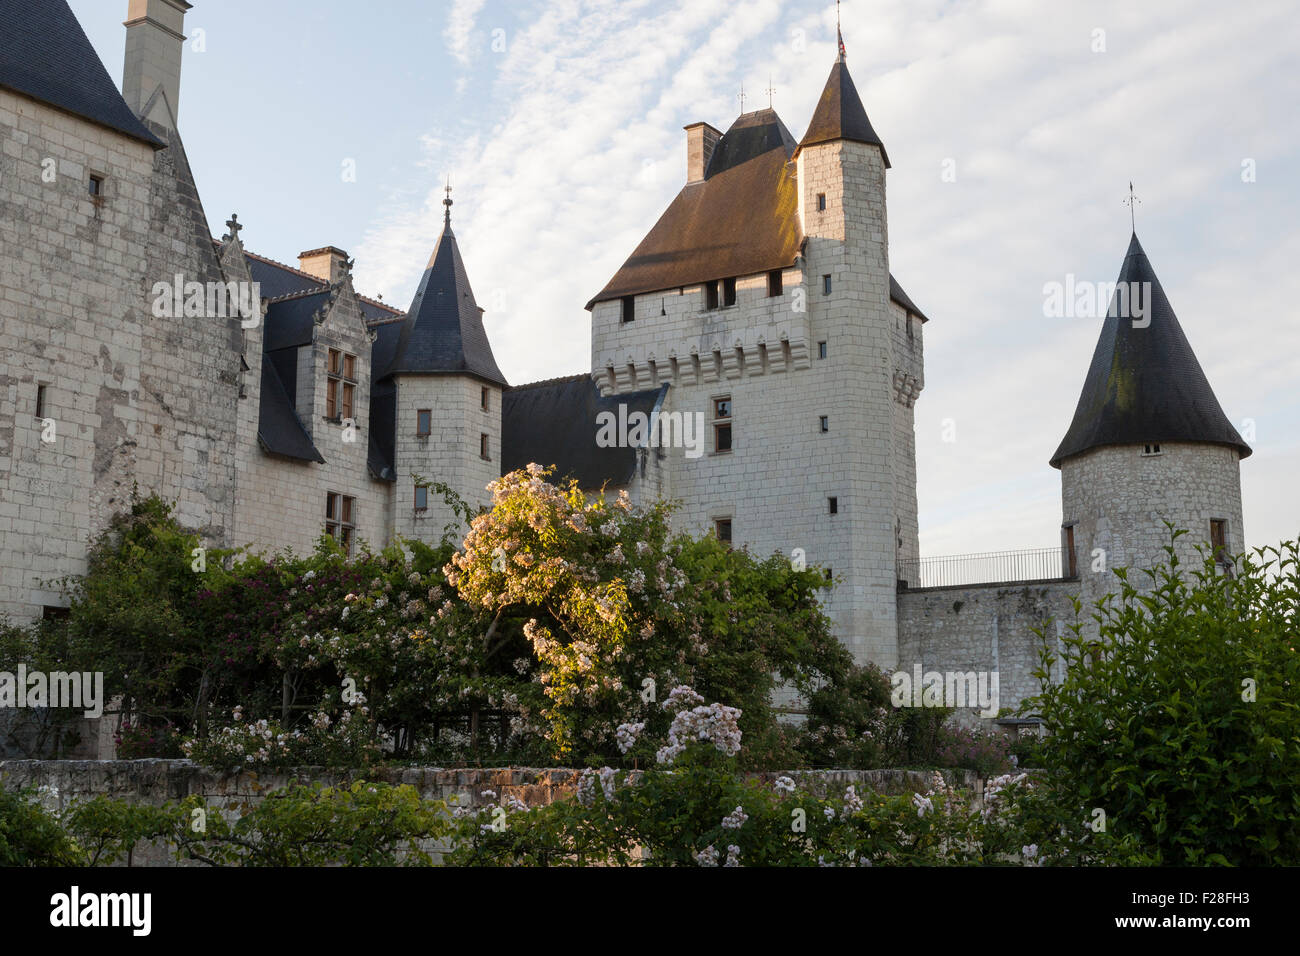 Chateau du Rivau, early morning light with rose beds in foreground Stock Photo